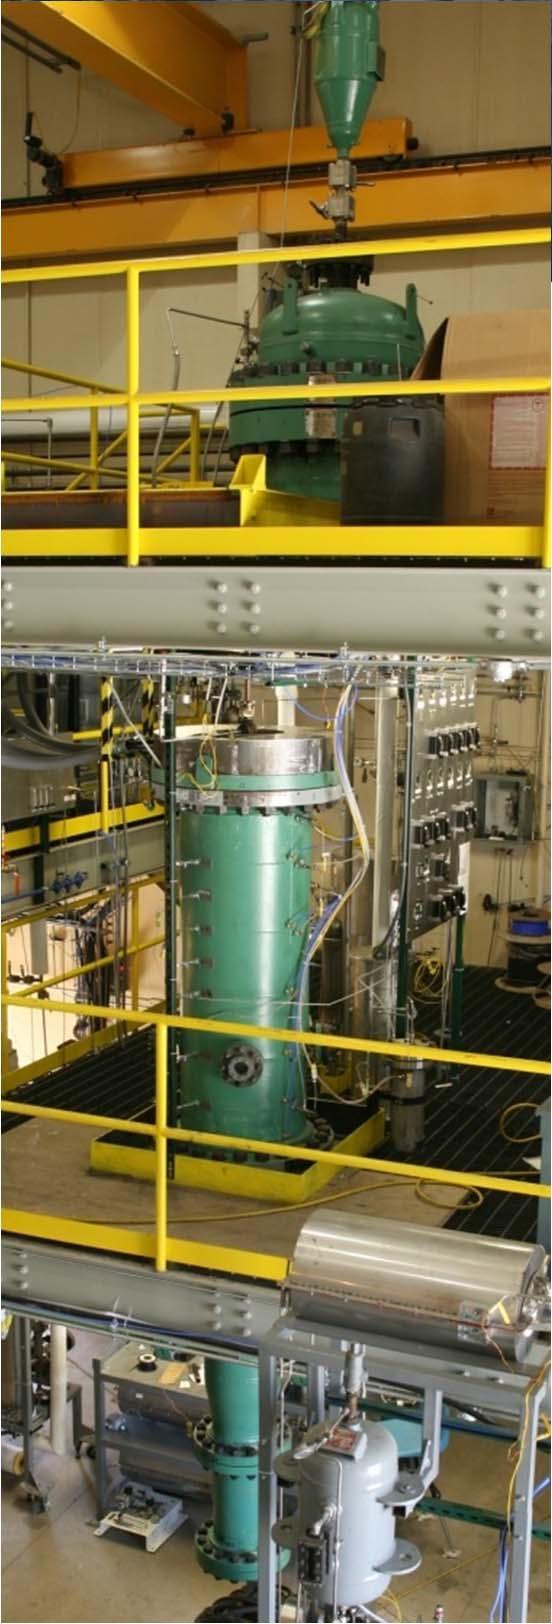 Small Pilot-Scale Gasification Test Systems EERC small pilot-scale gasifiers are used for syngas generation: Entrained-flow gasifier (EFG) 2850 F (1565 C) 300